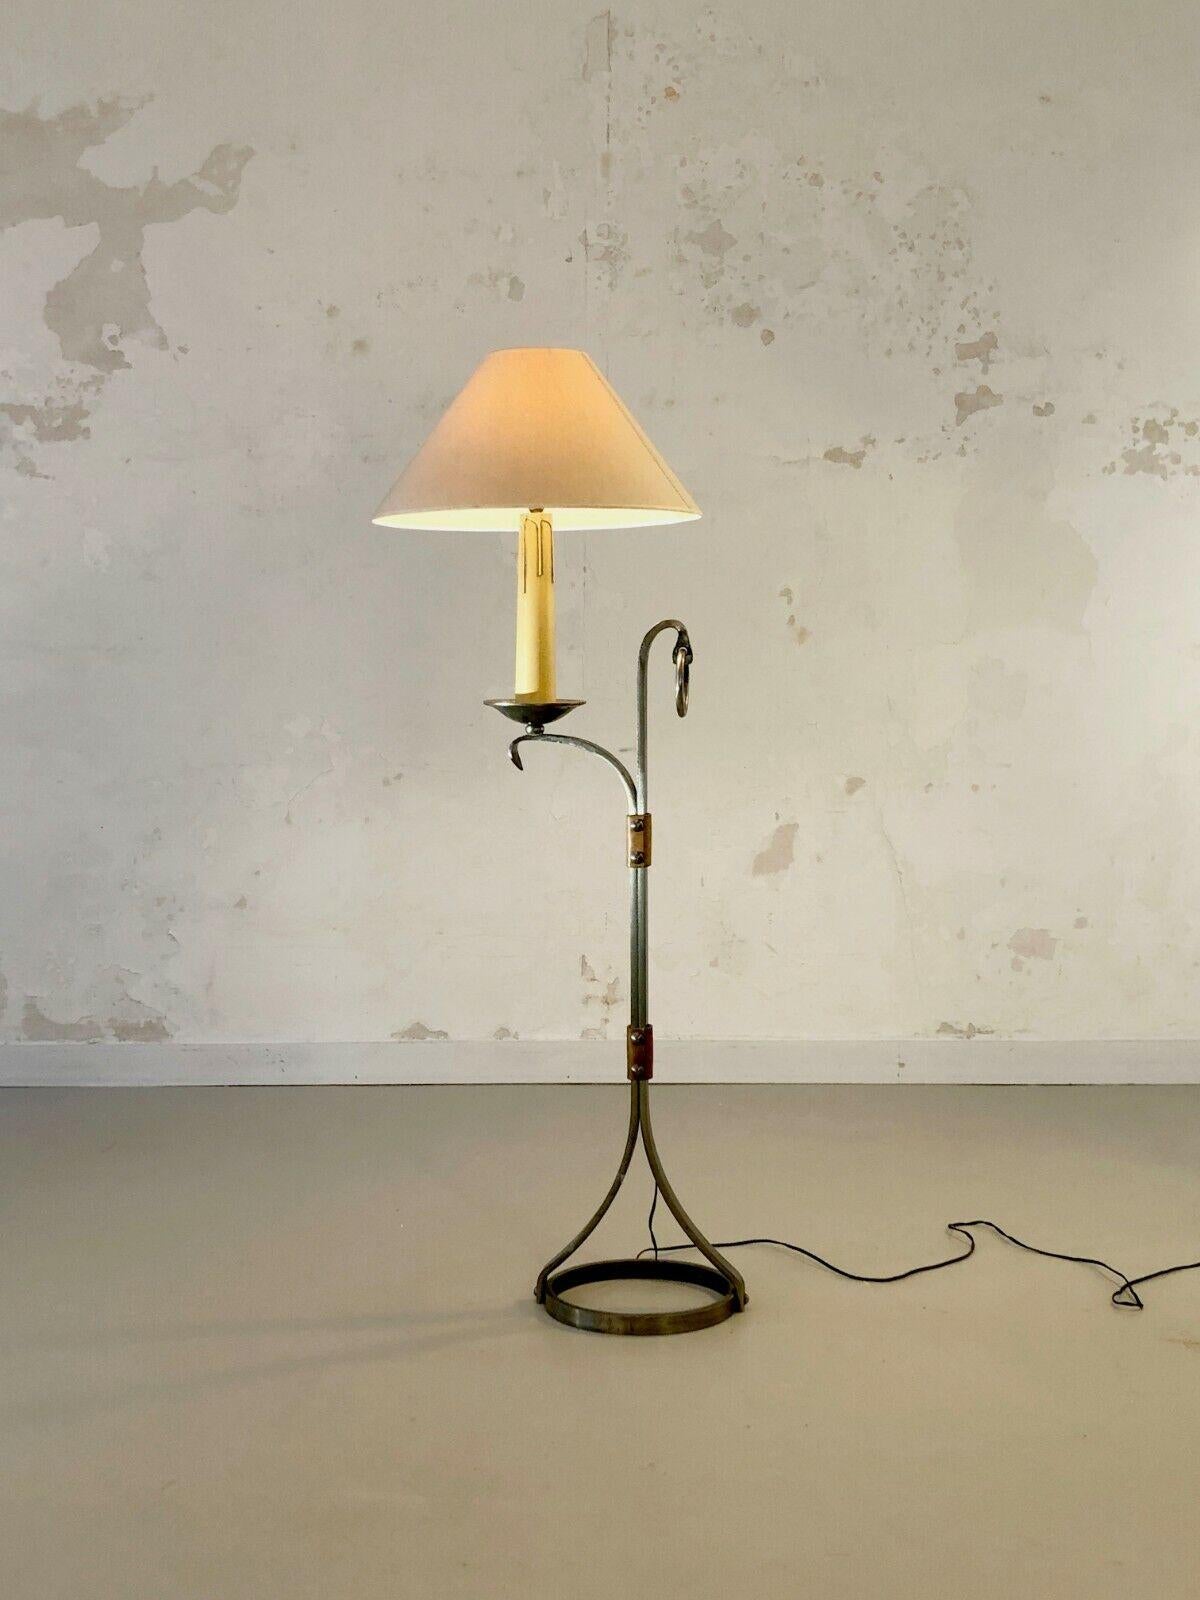 A small but massive floor lamp or reading light, Rustic-Modern, Art-Popular, Brutalist, Shabby-Chic, structure in solid hammered wrought iron and thick leather bolted to the structure, by Jean-Pierre Ryckaert, edition Ryckaert / Le Dauphin, France